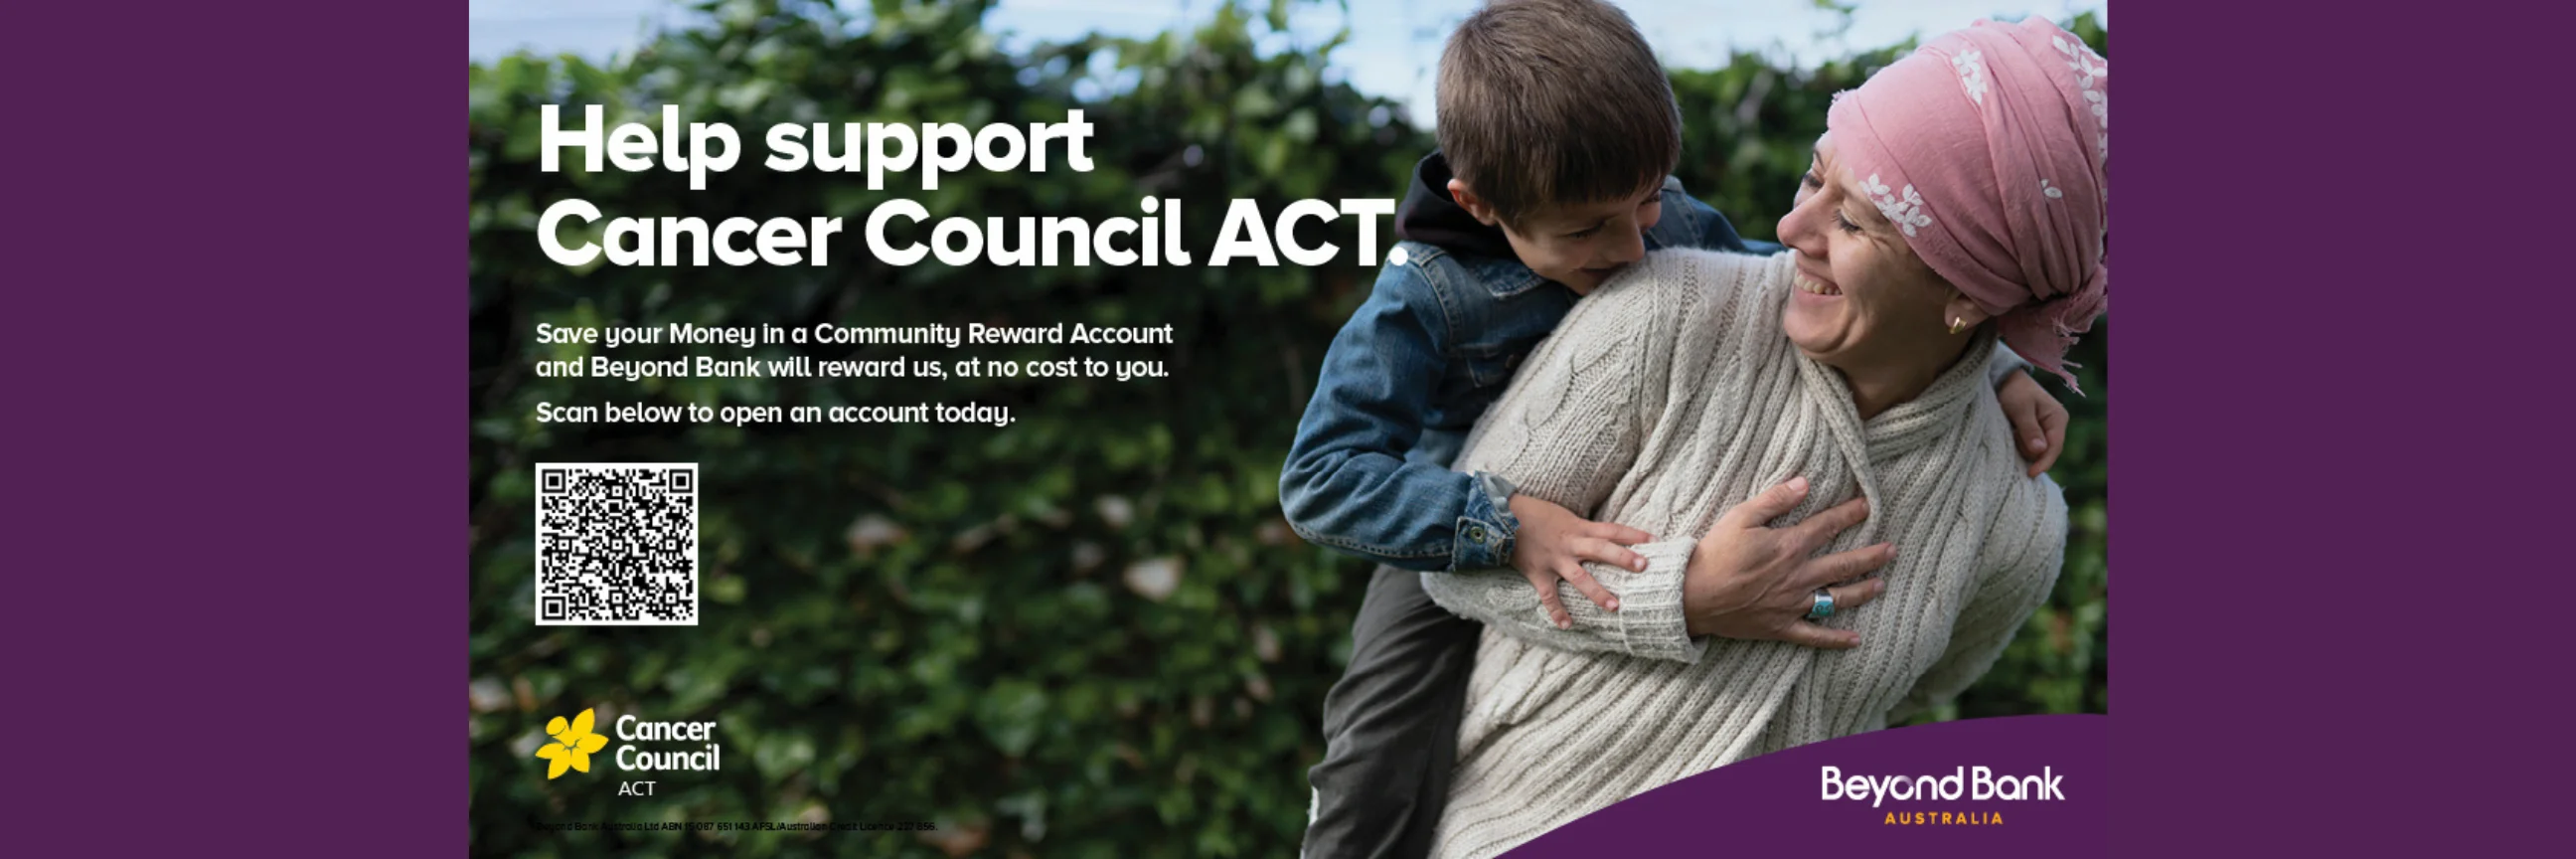 Help Support Cancer Council ACT